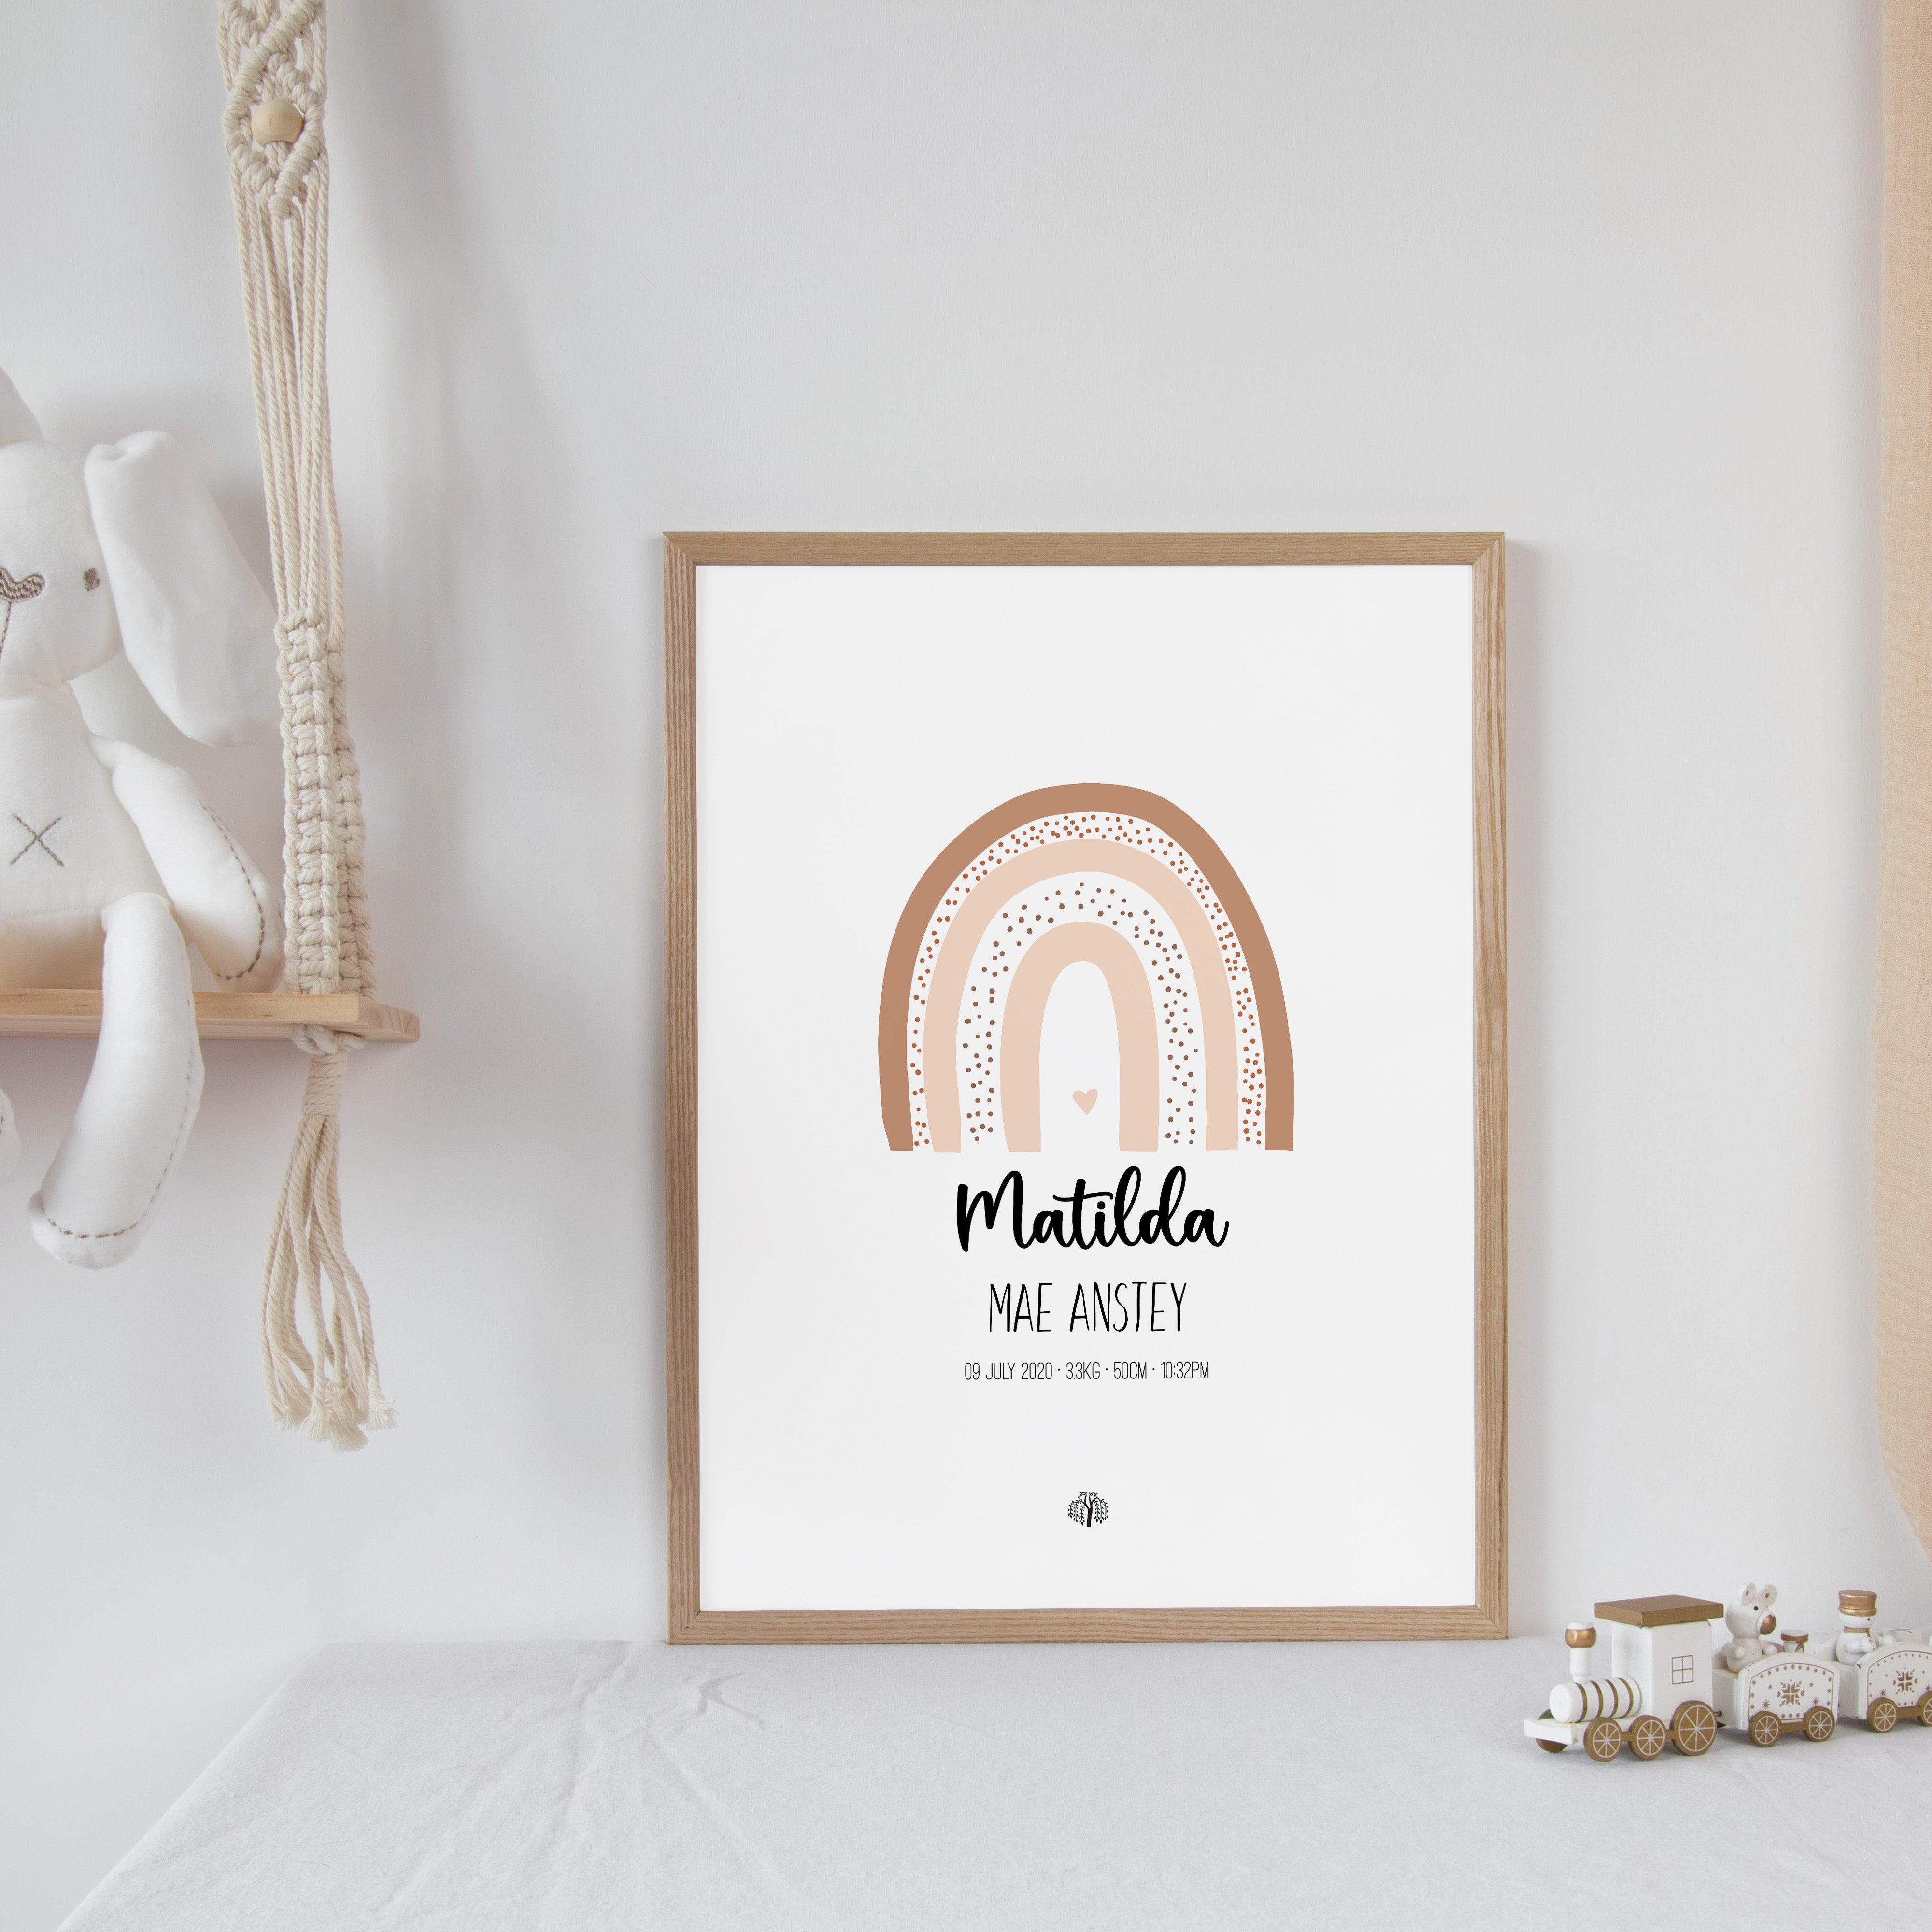 Boho Rainbow - Earth - Personalised Birth Details Poster - The Willow Corner